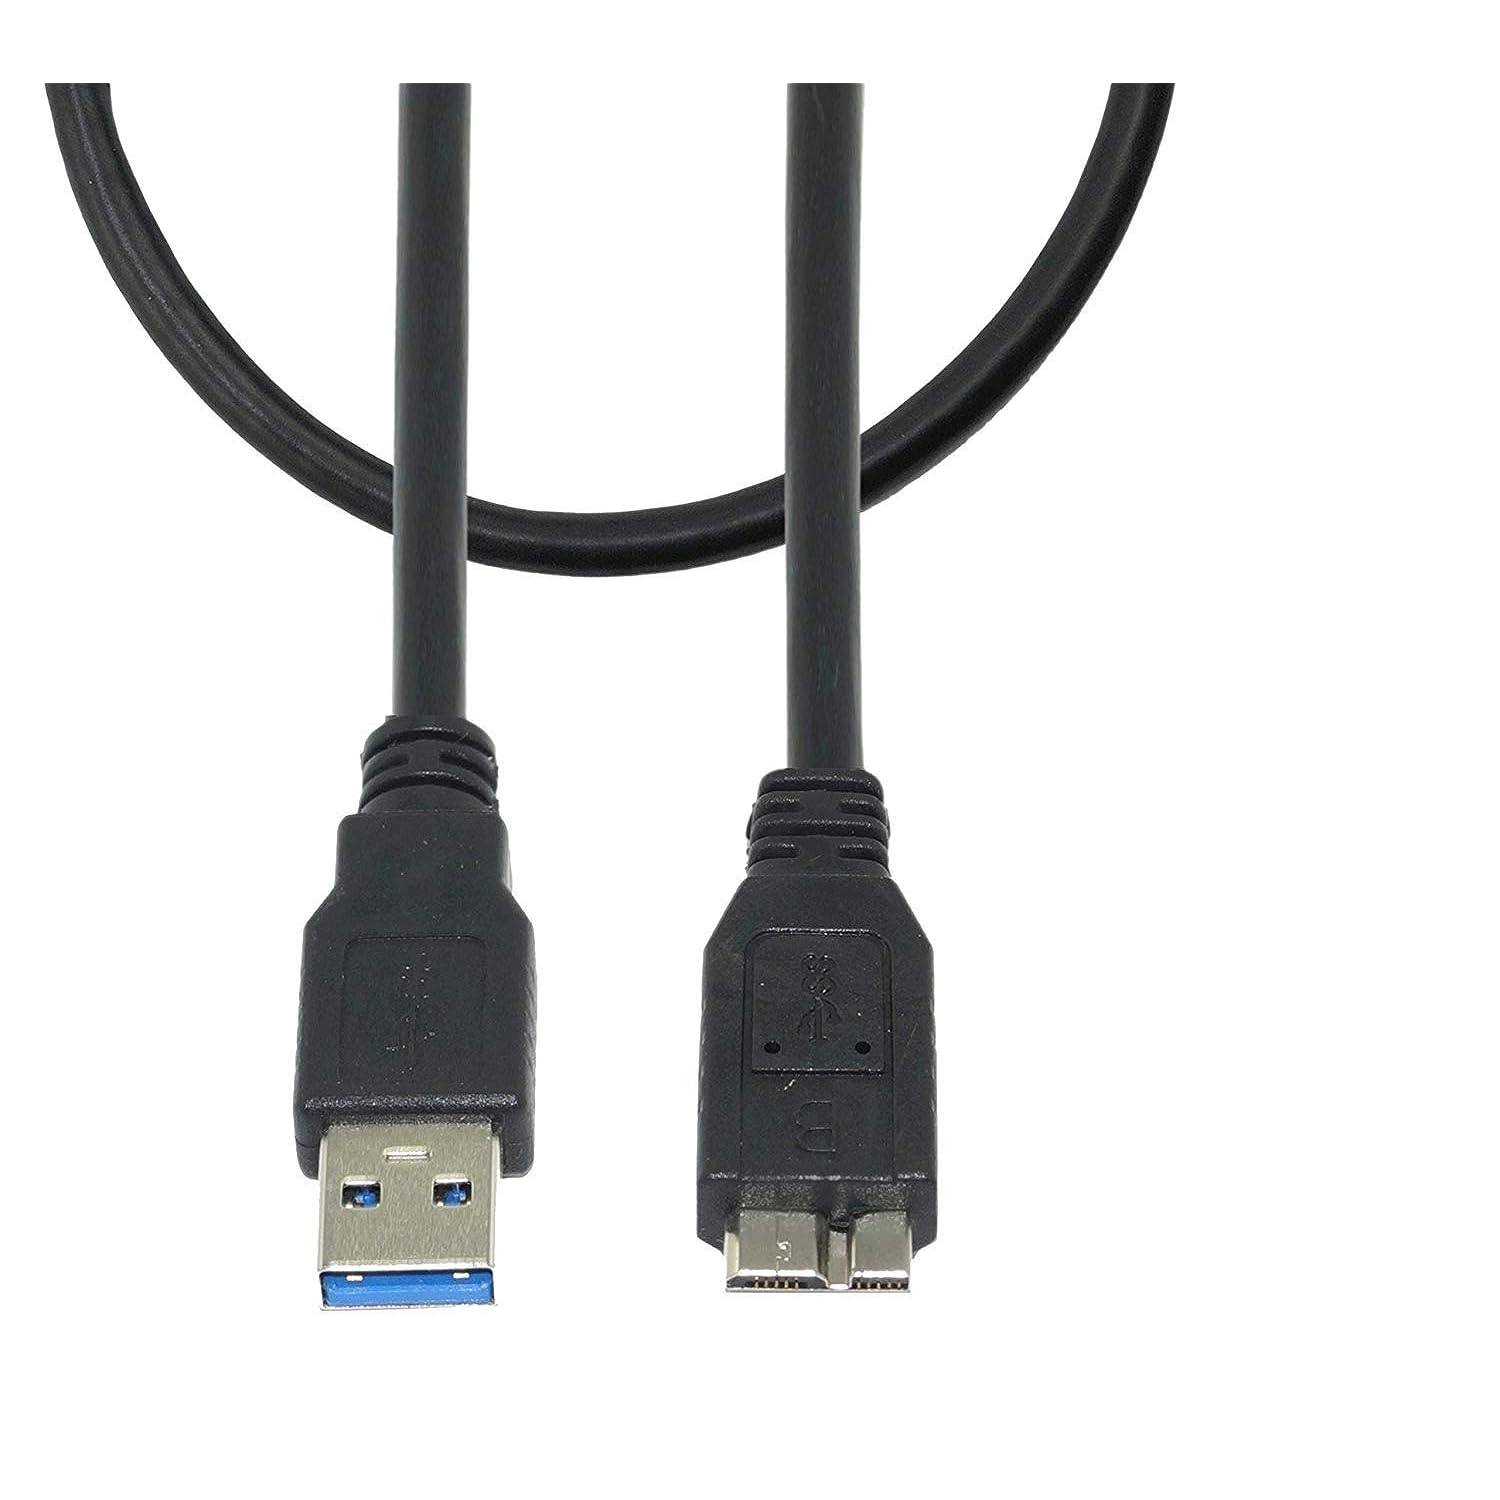 FBA_4447839 Storite OEM SuperSpeed USB 3.0 Cable A to Micro B - 3 Feet